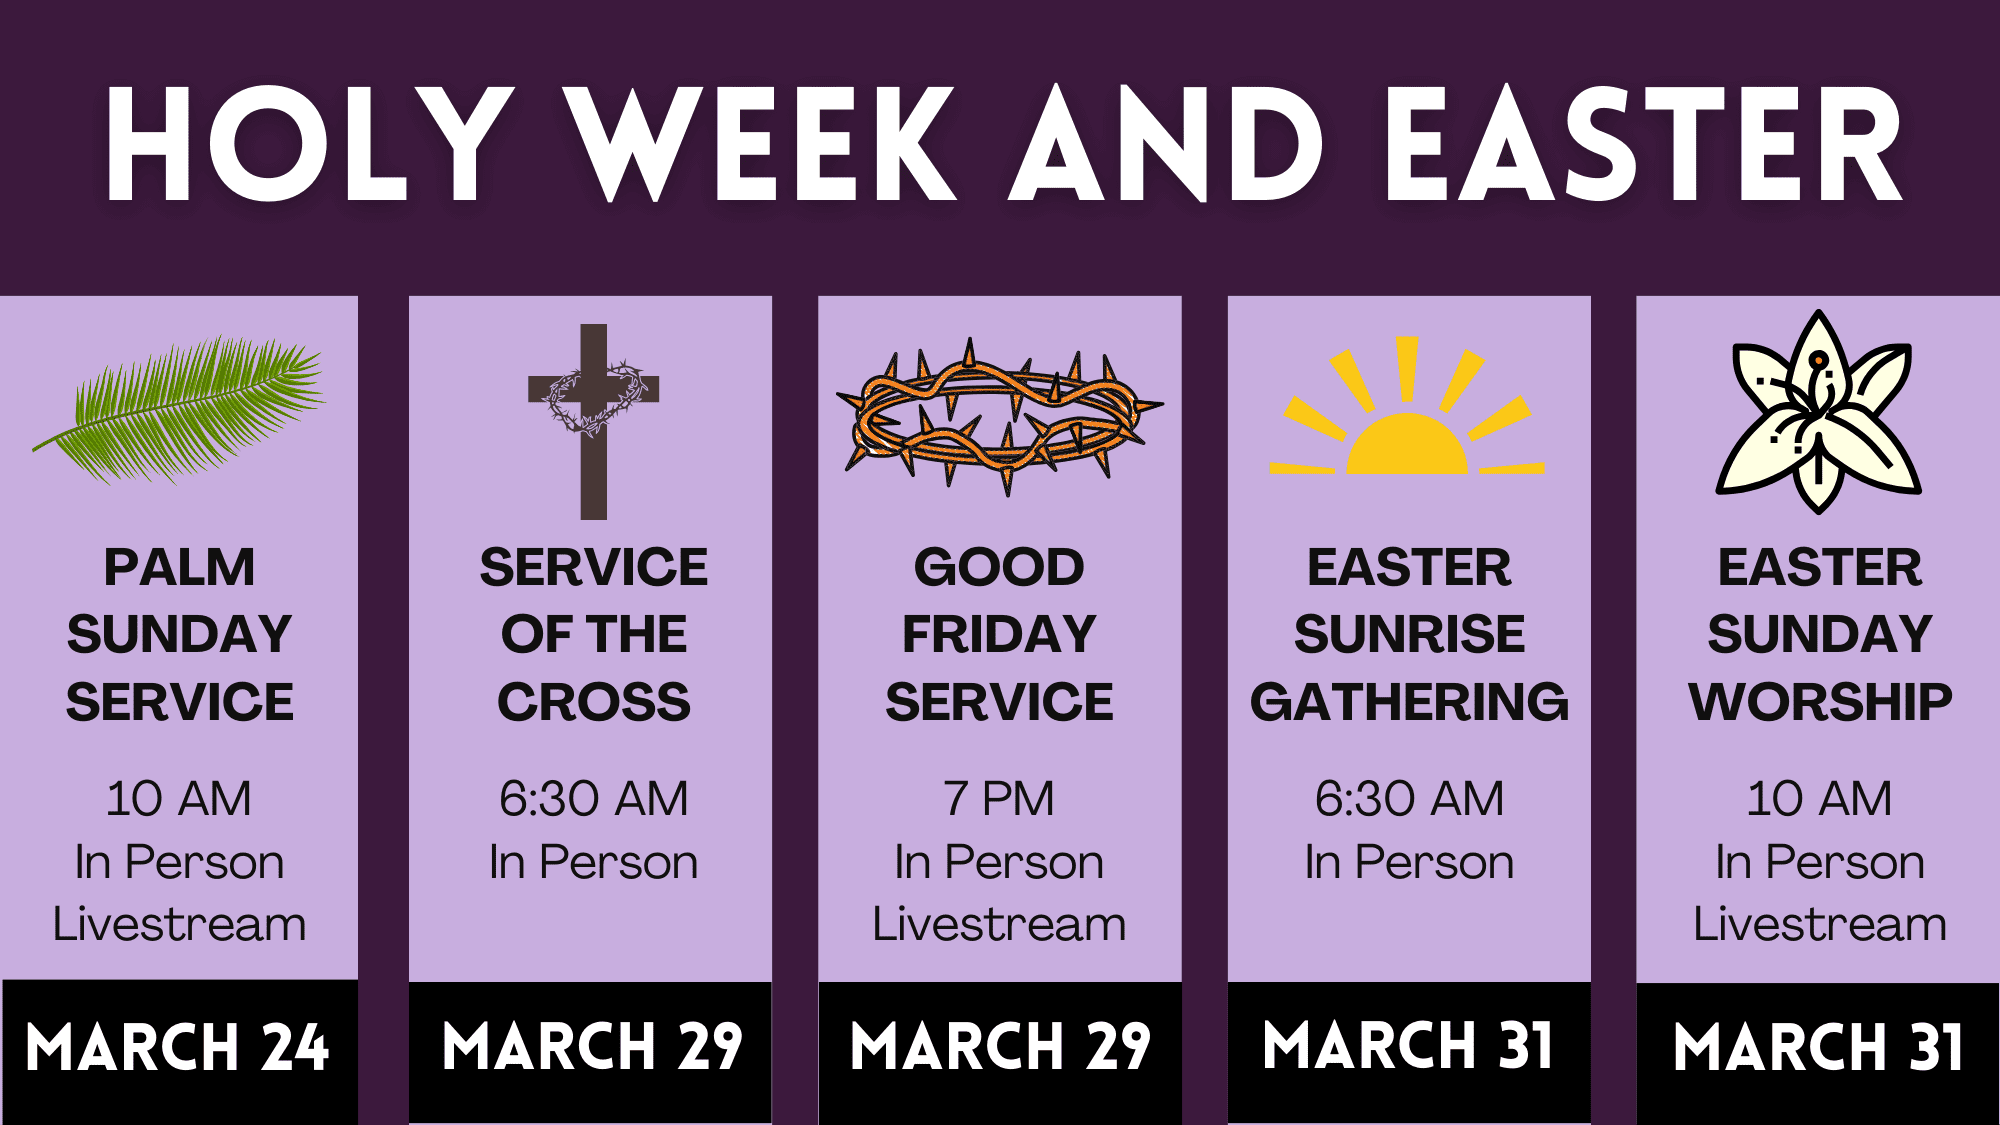 Holy Week Services and Easter Worship